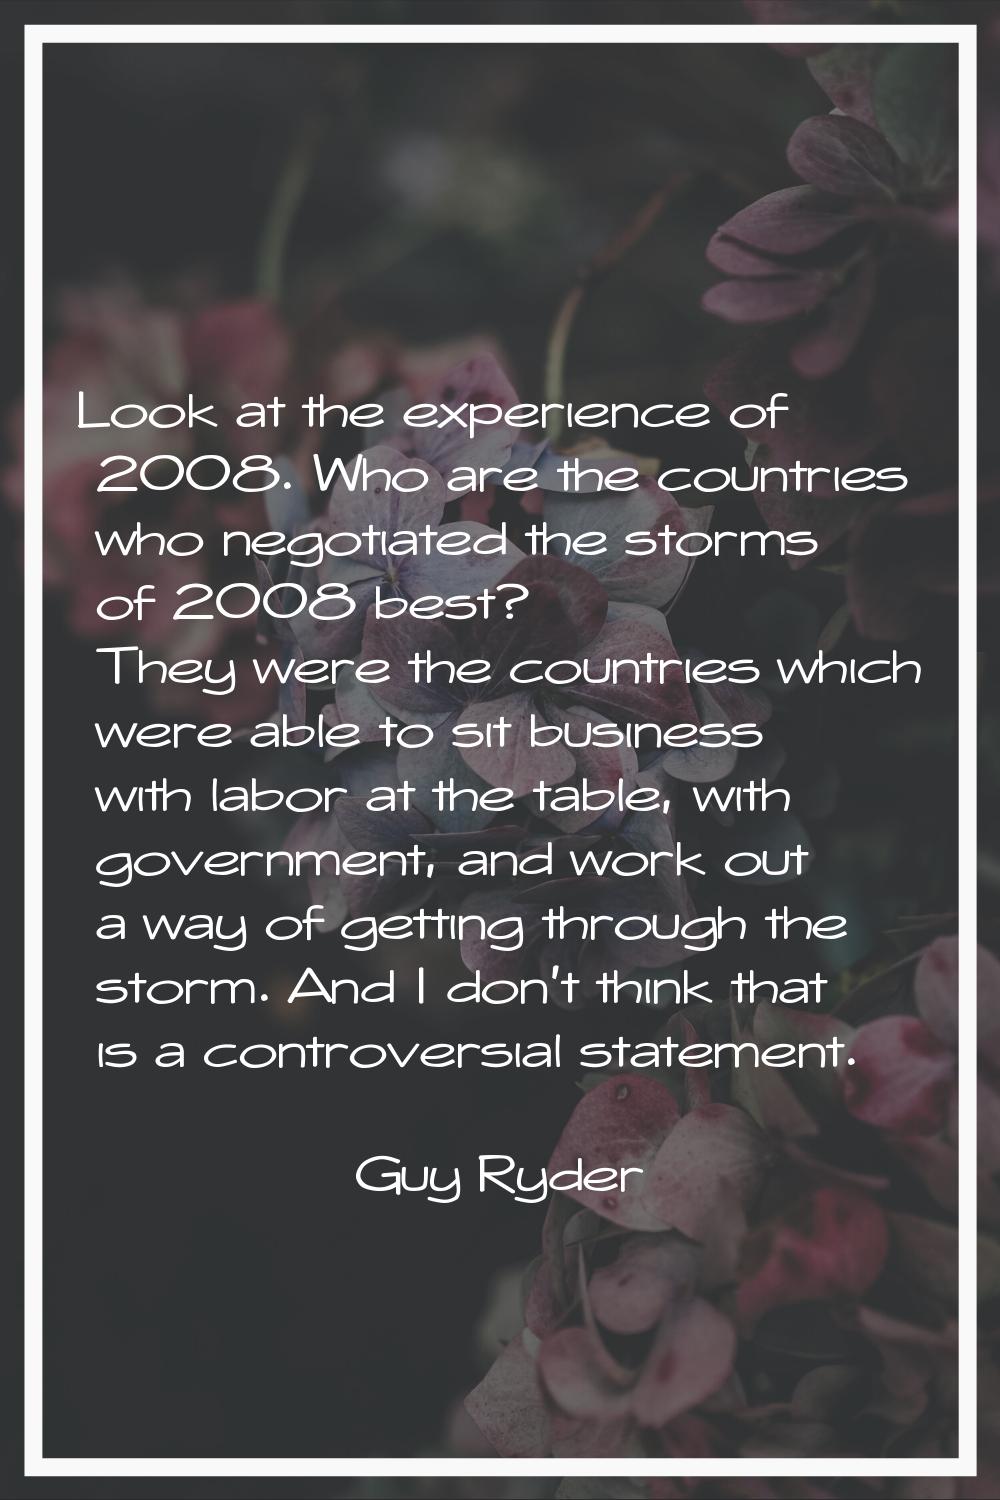 Look at the experience of 2008. Who are the countries who negotiated the storms of 2008 best? They 